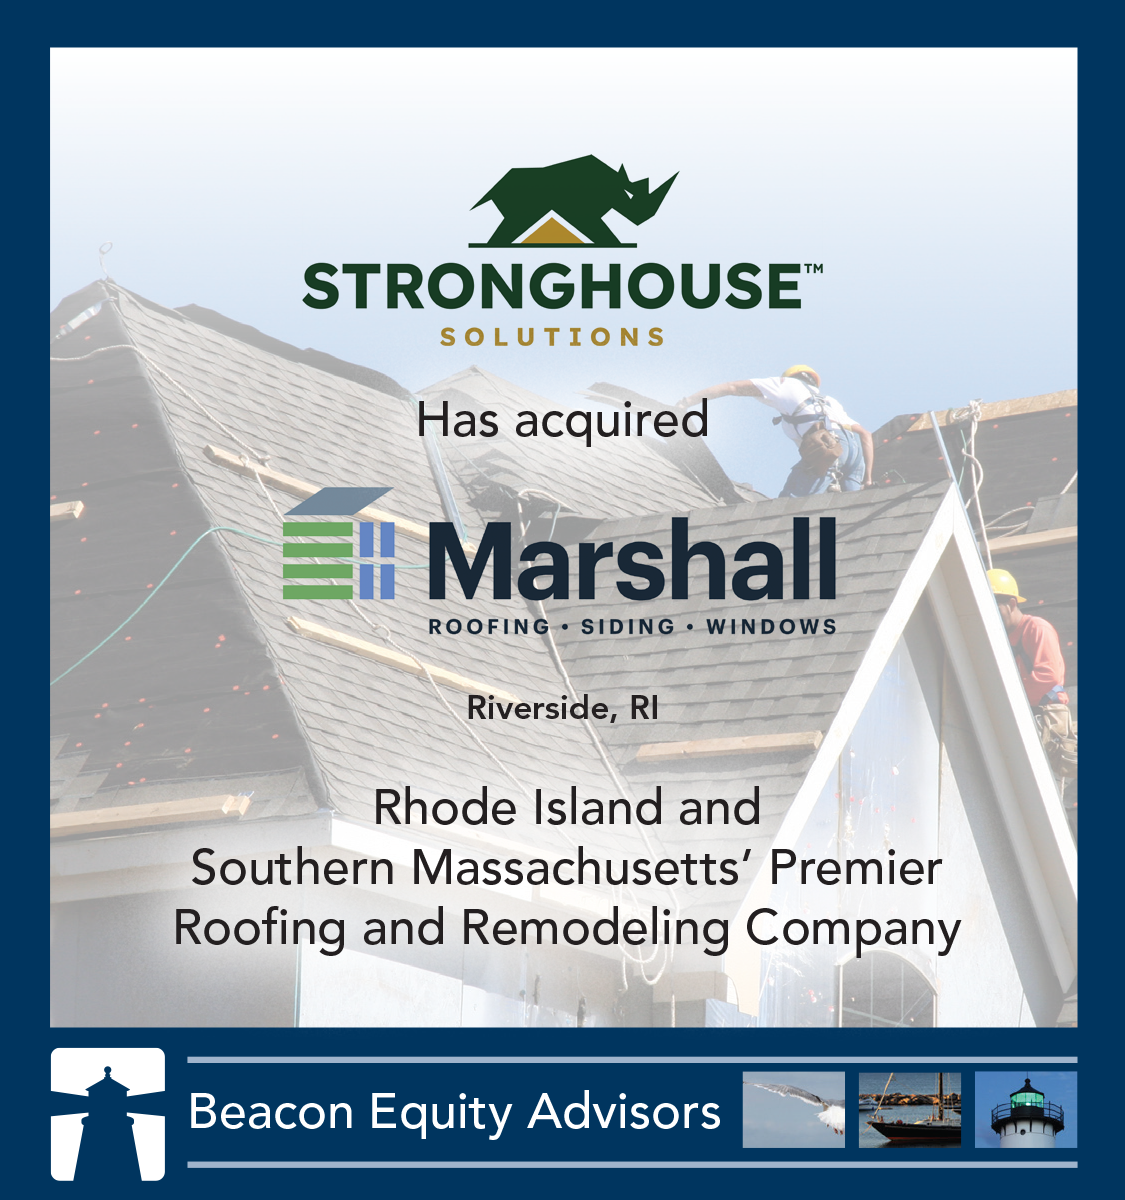 Marshall purchased by Stronghouse Solutions